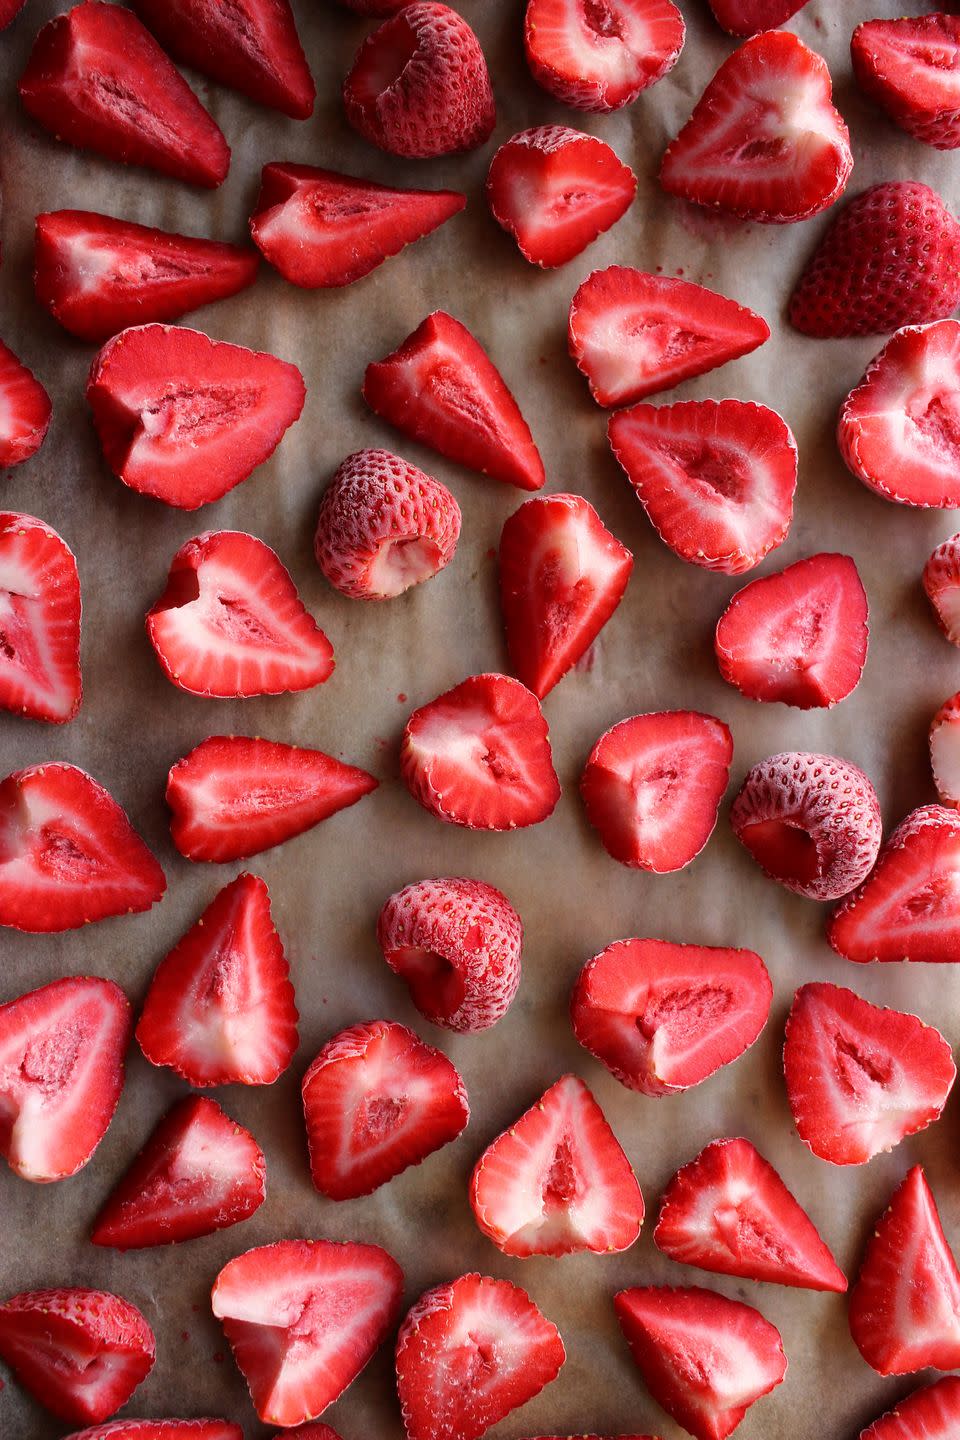 How To Freeze Strawberries